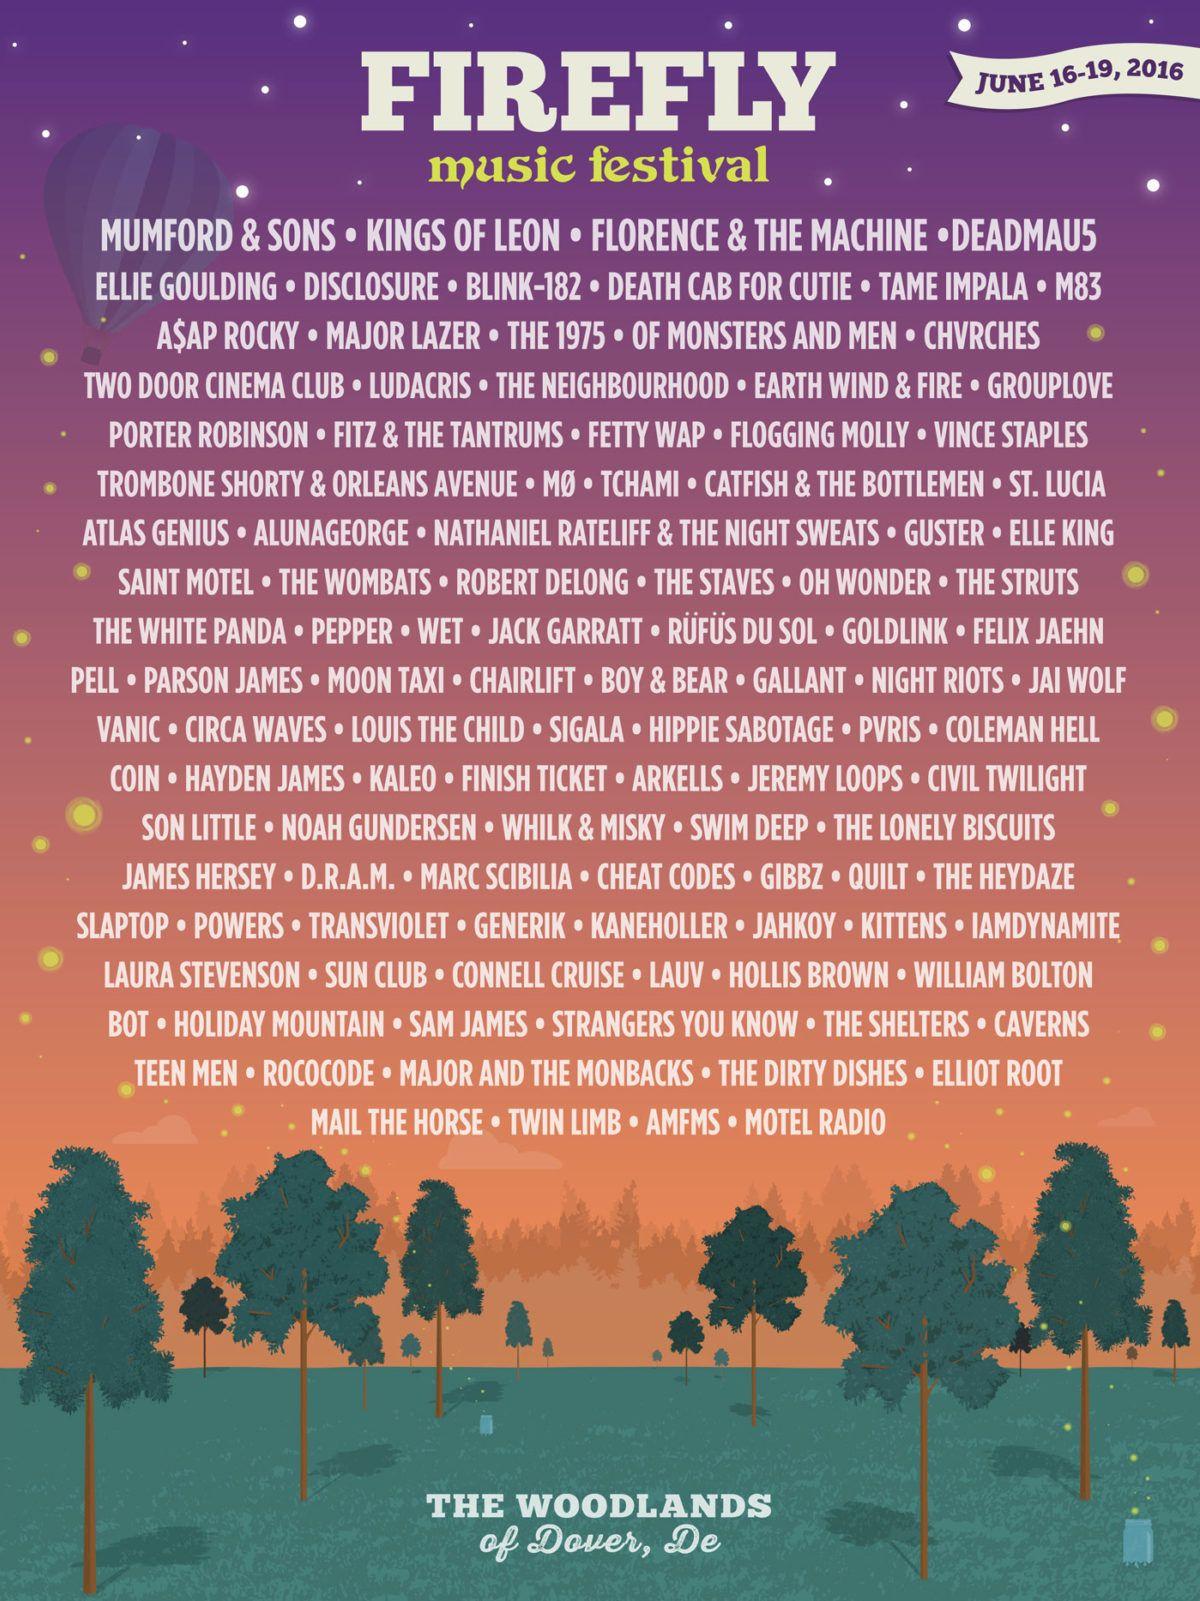 Firefly Festival Lineup Announced for 2016